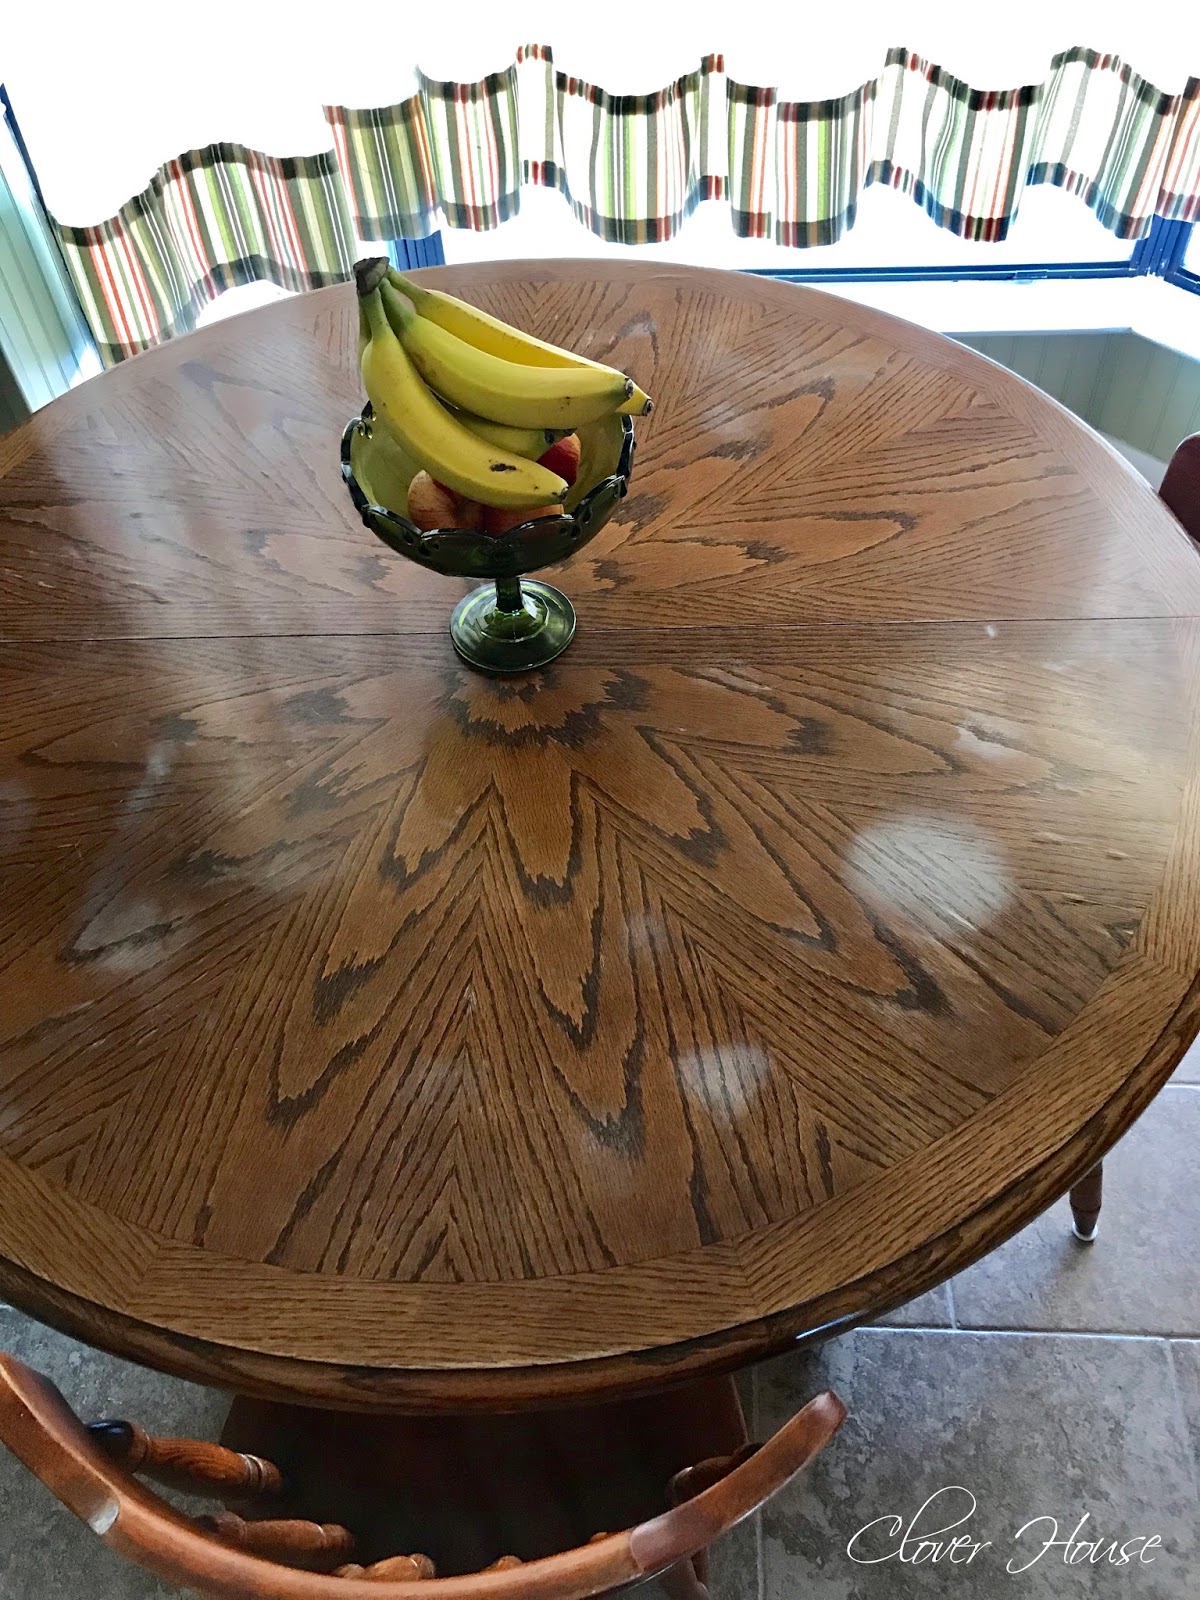 Clover House: Removing White Heat Marks From Your Table Top